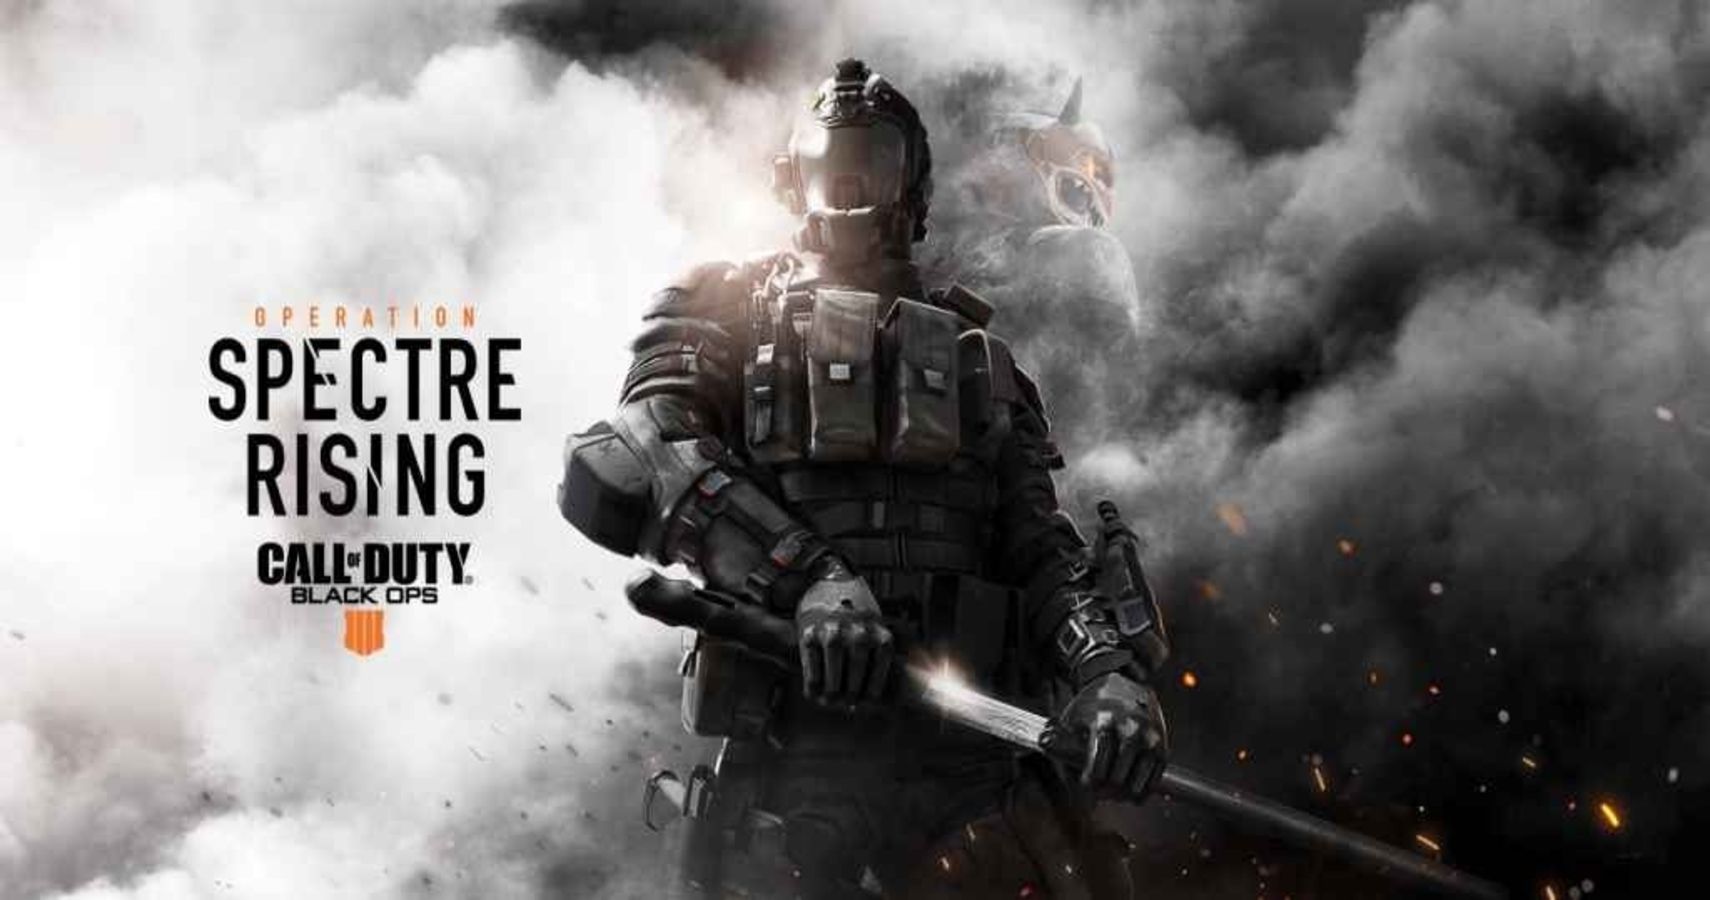 Call Of Duty Black Ops 4 Operation Spectre Rising Everything You Need To Know